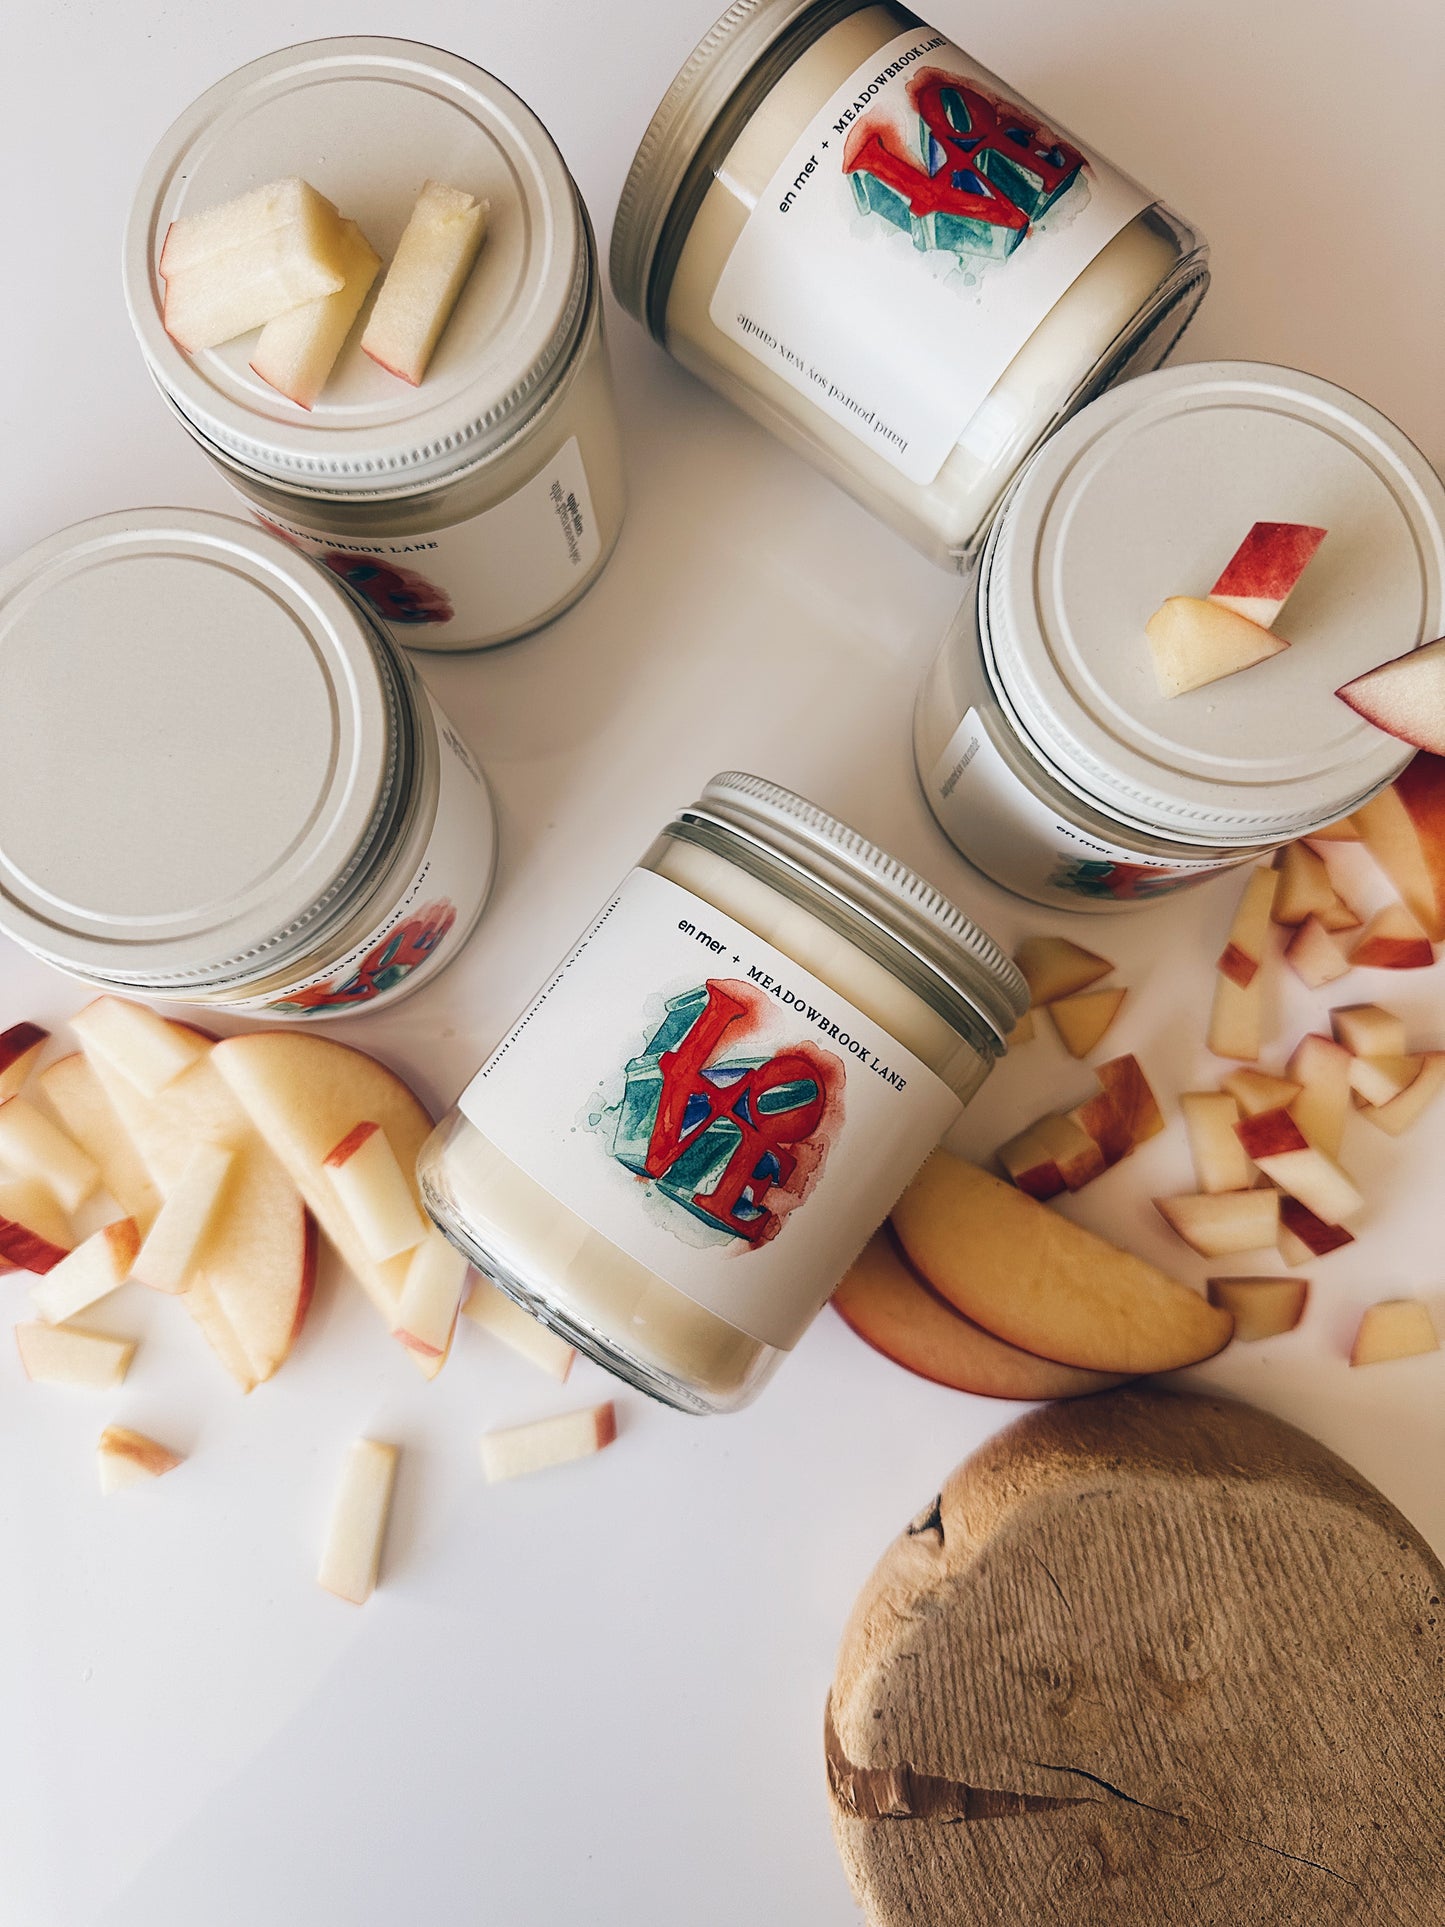 en mer + Meadowbrook Lane | LOVE, philly | soy wax candle